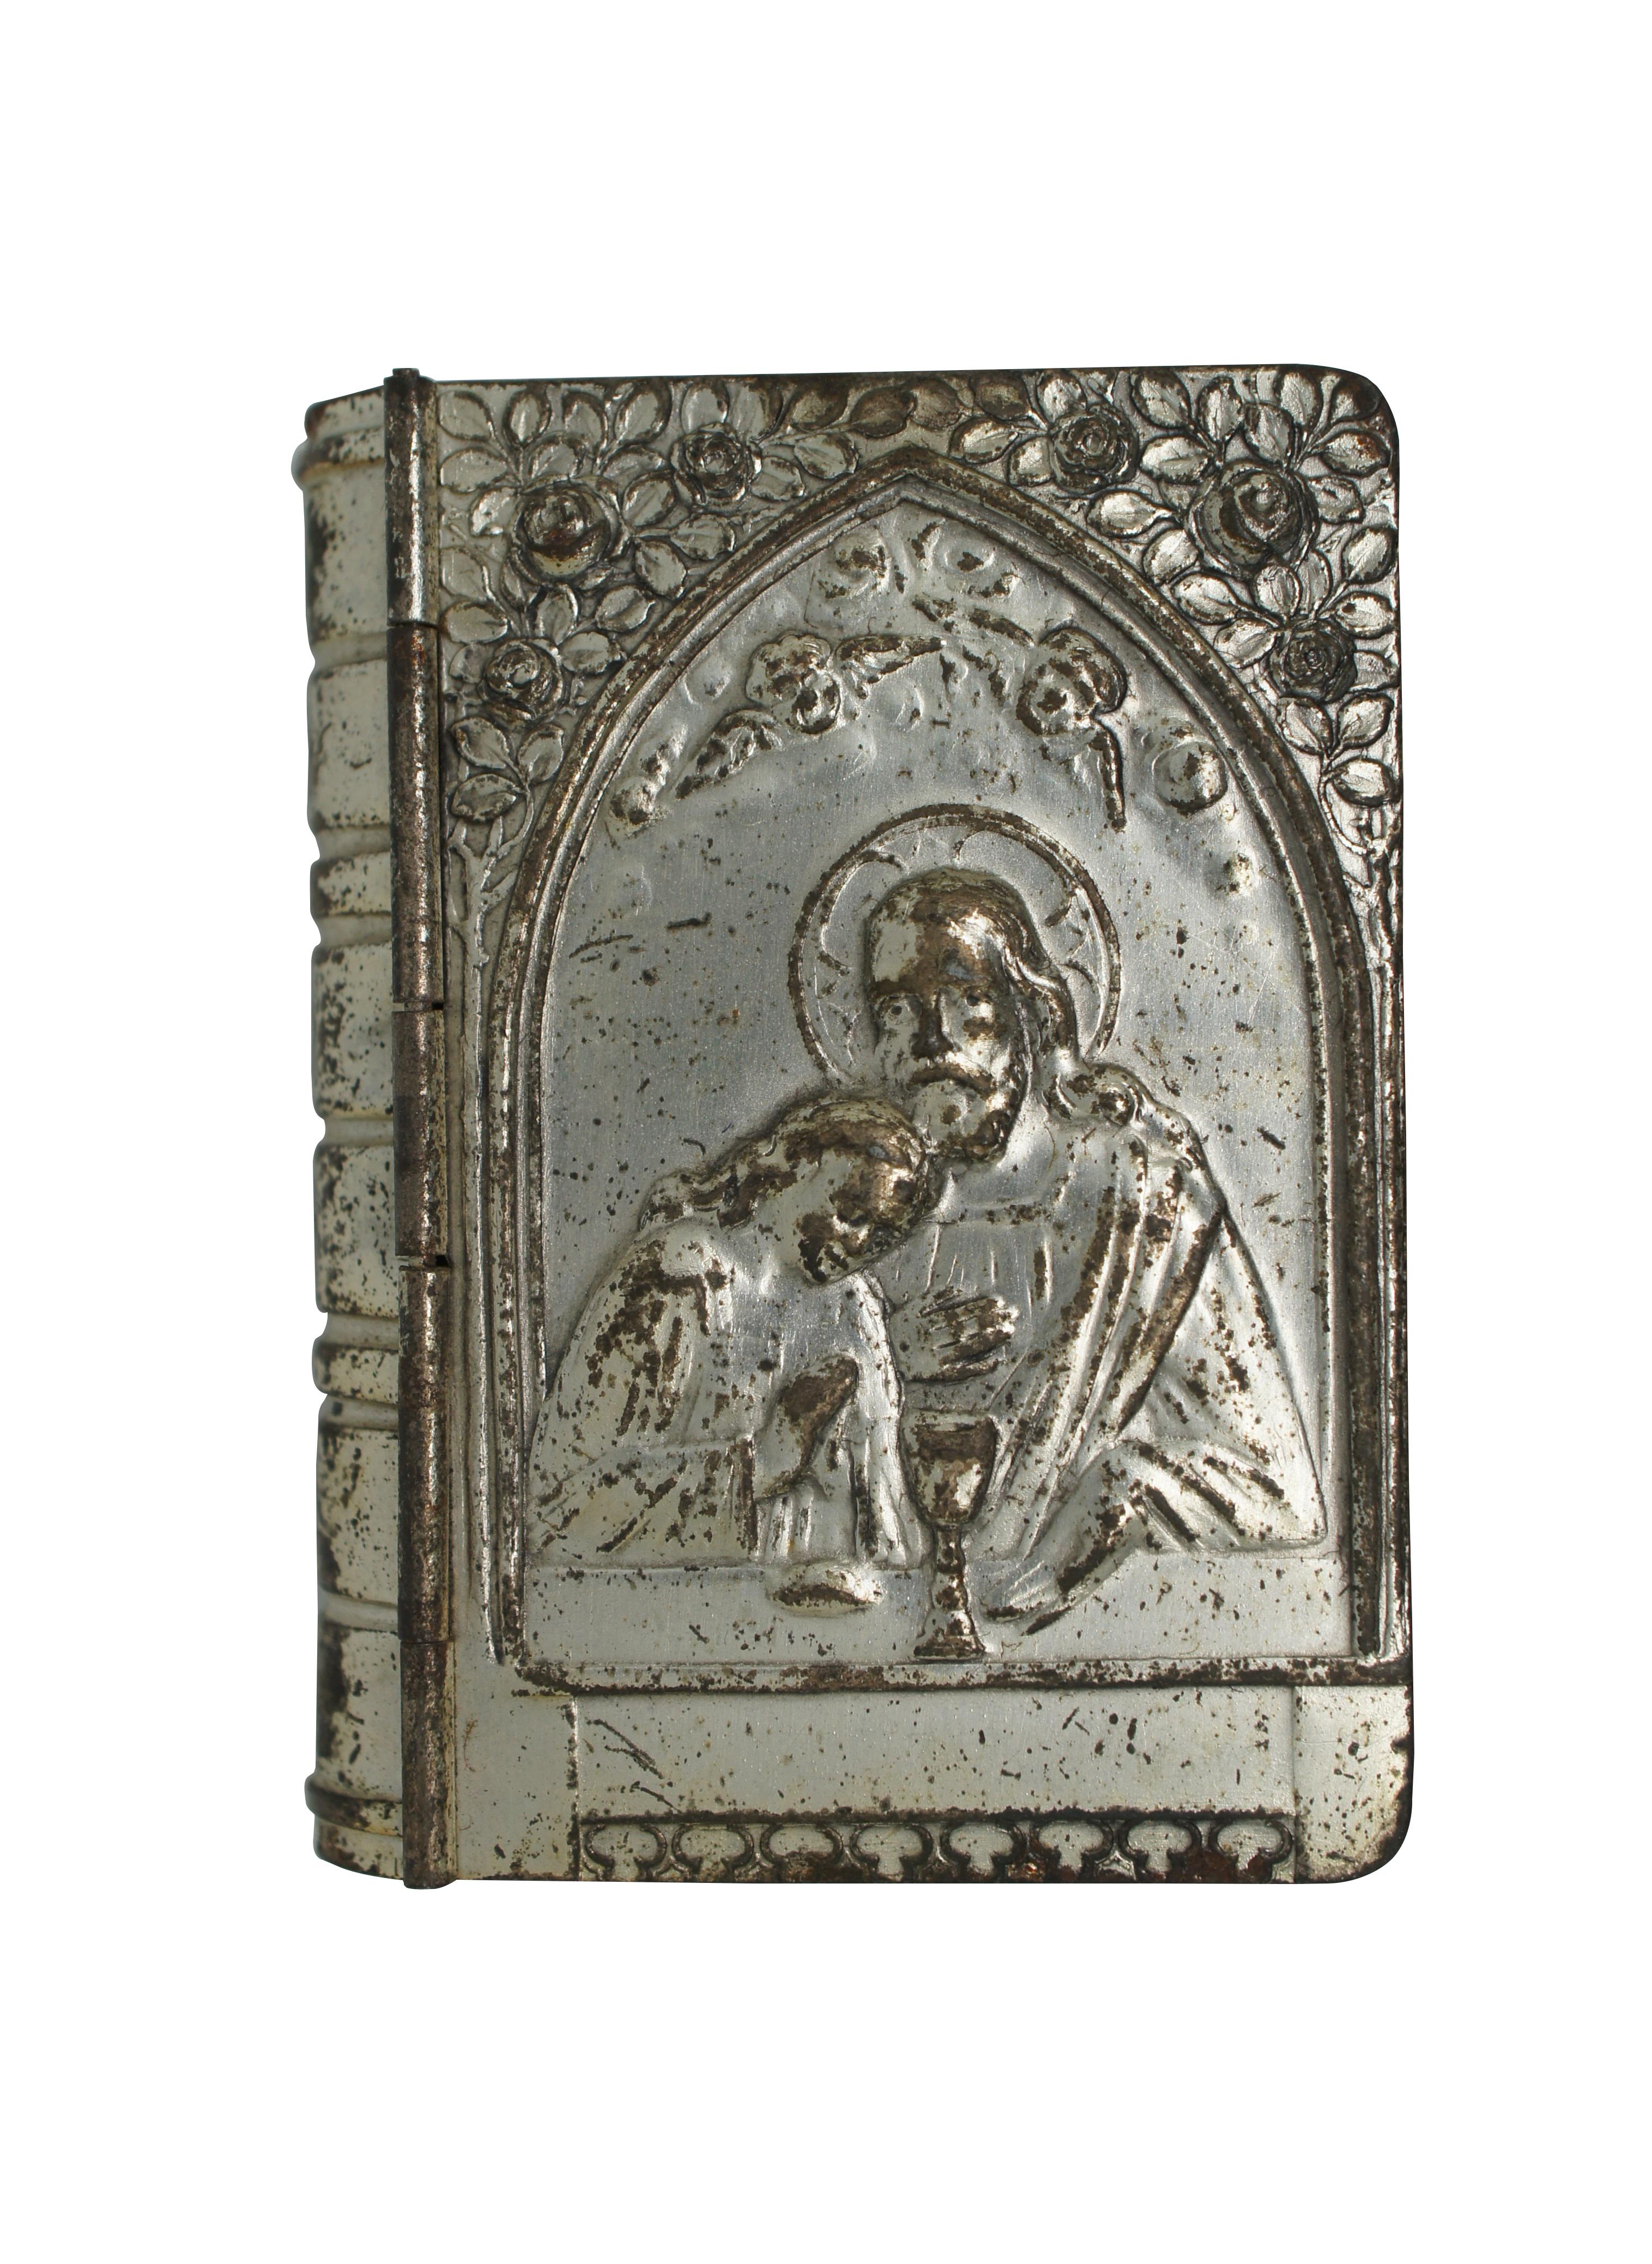 Mid to early 20th century German / French silver plate rosary holder case and necklace.  Shaped like a bible book featuring a scene with Jesus giving communion and mother of pearl rosary with cross.  Allemagne is the French name for